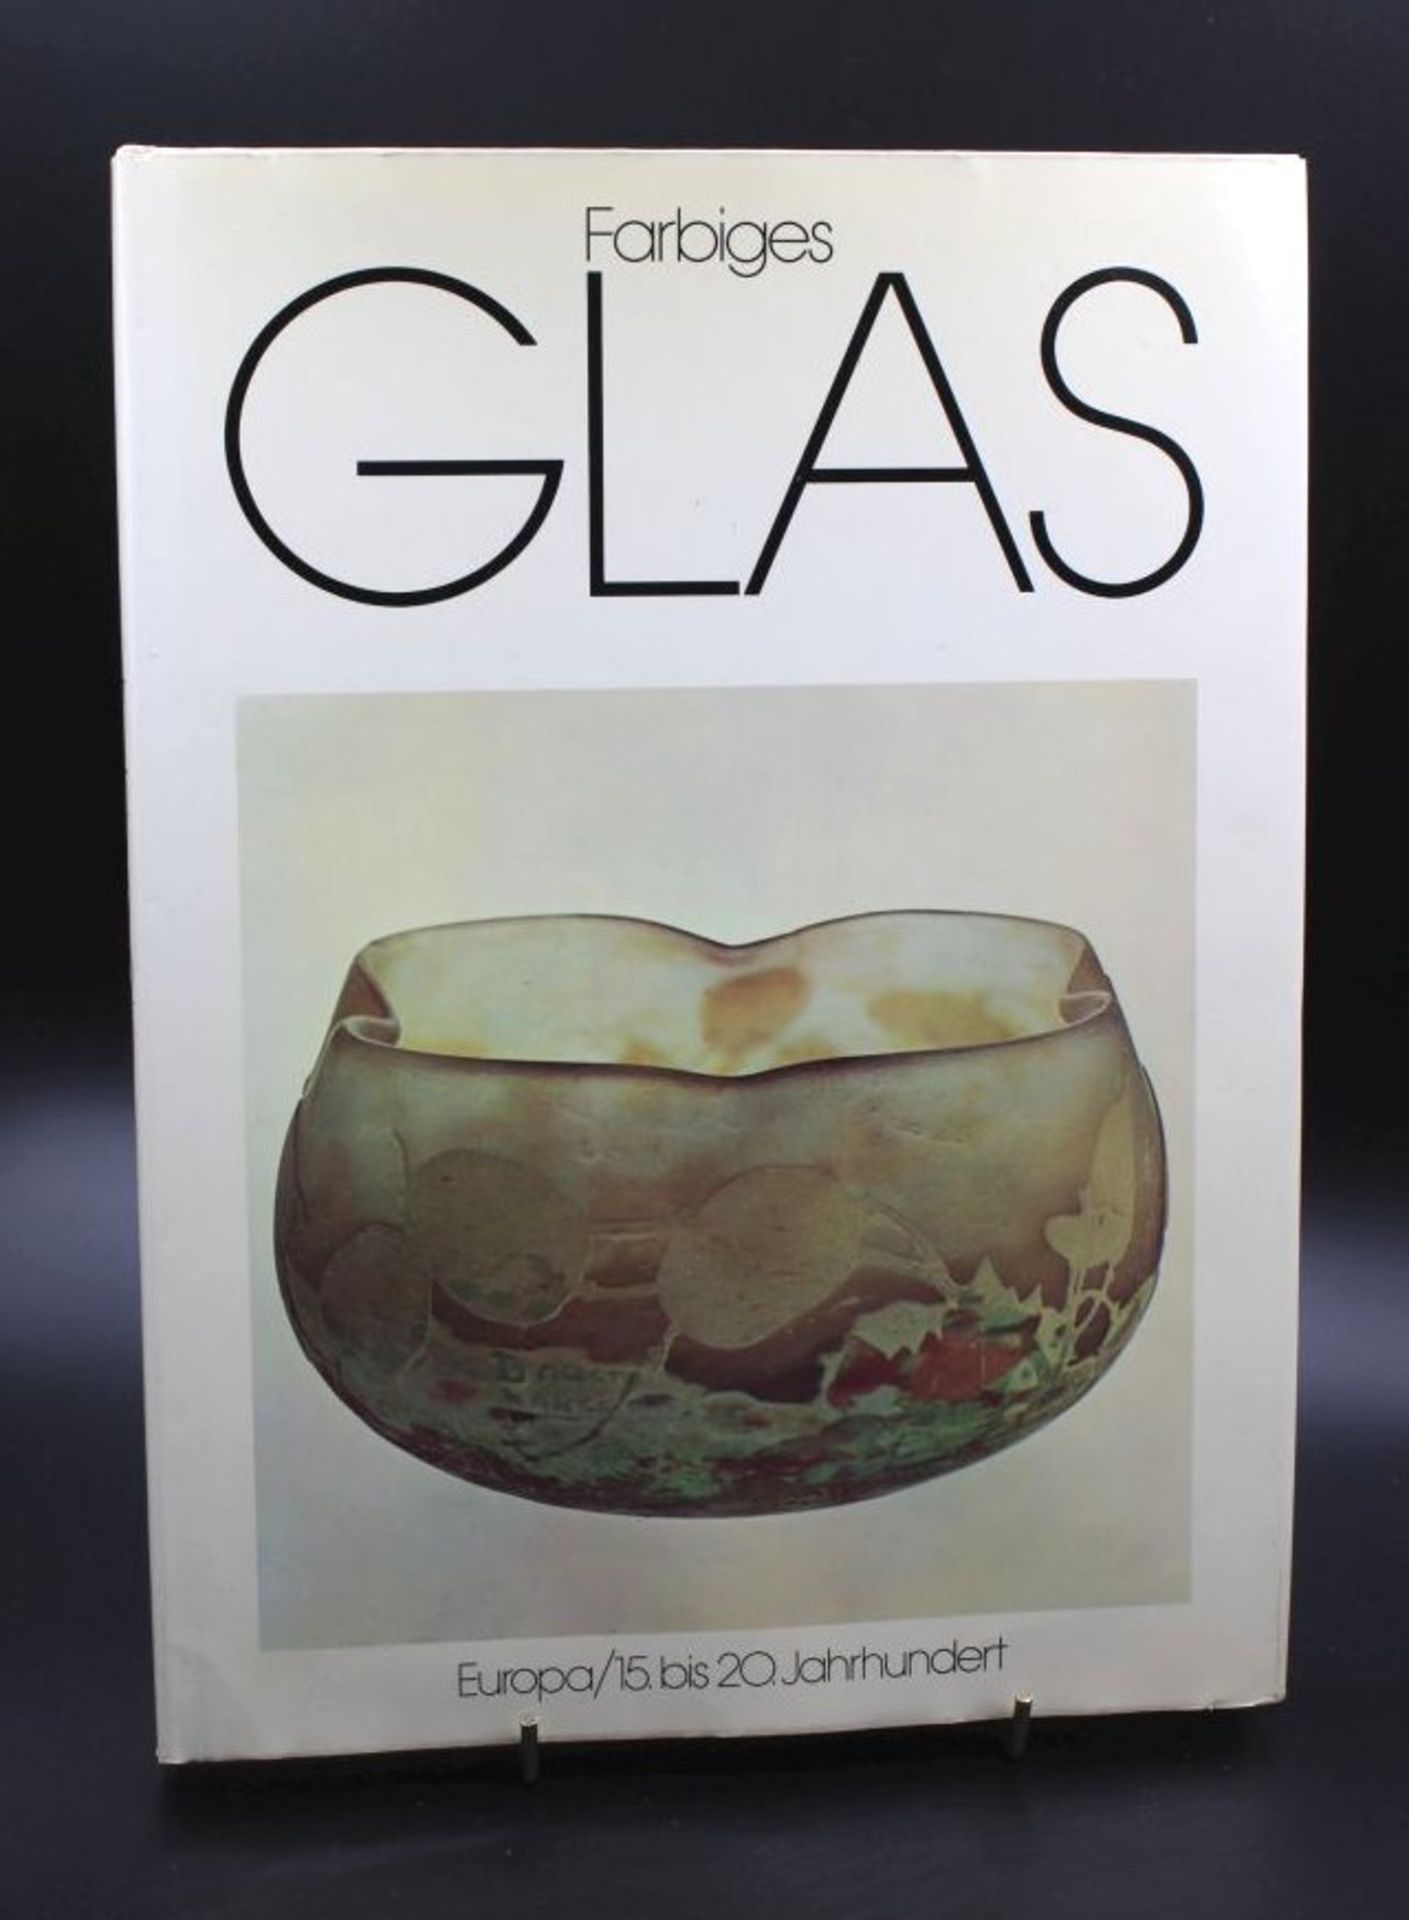 Farbiges Glas, Keith Middlemas, Wiesbaden 1971.